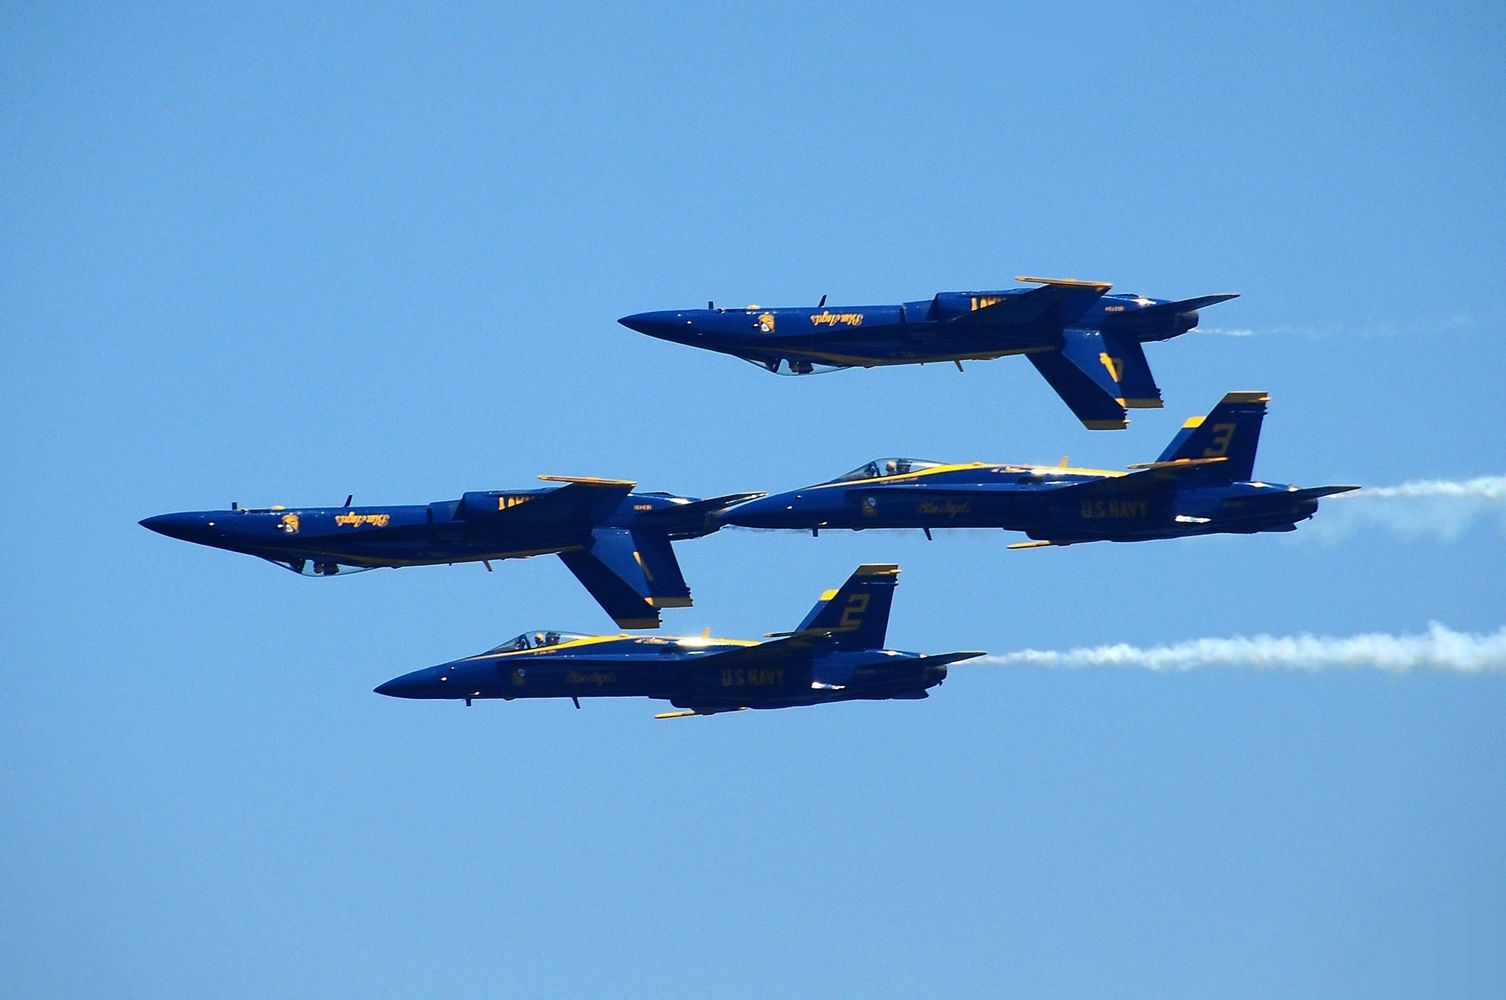 Mickey Markoff 2023 - married to the air and sea show. Photo of four blue angel jets flying.